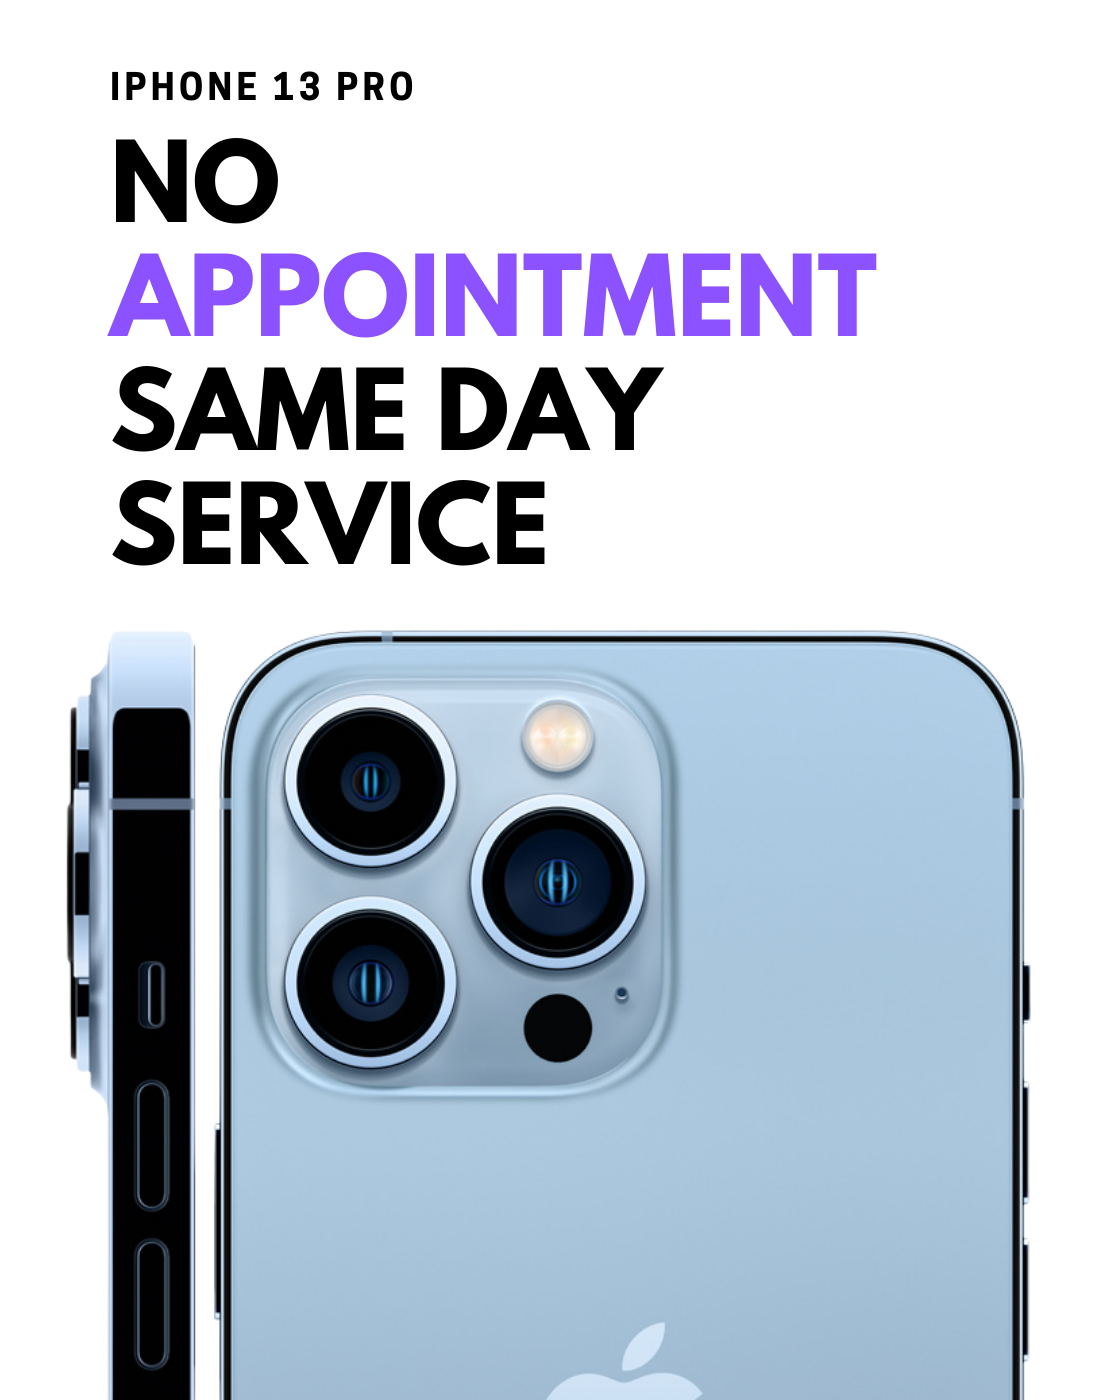 No Appointment Same Day Service